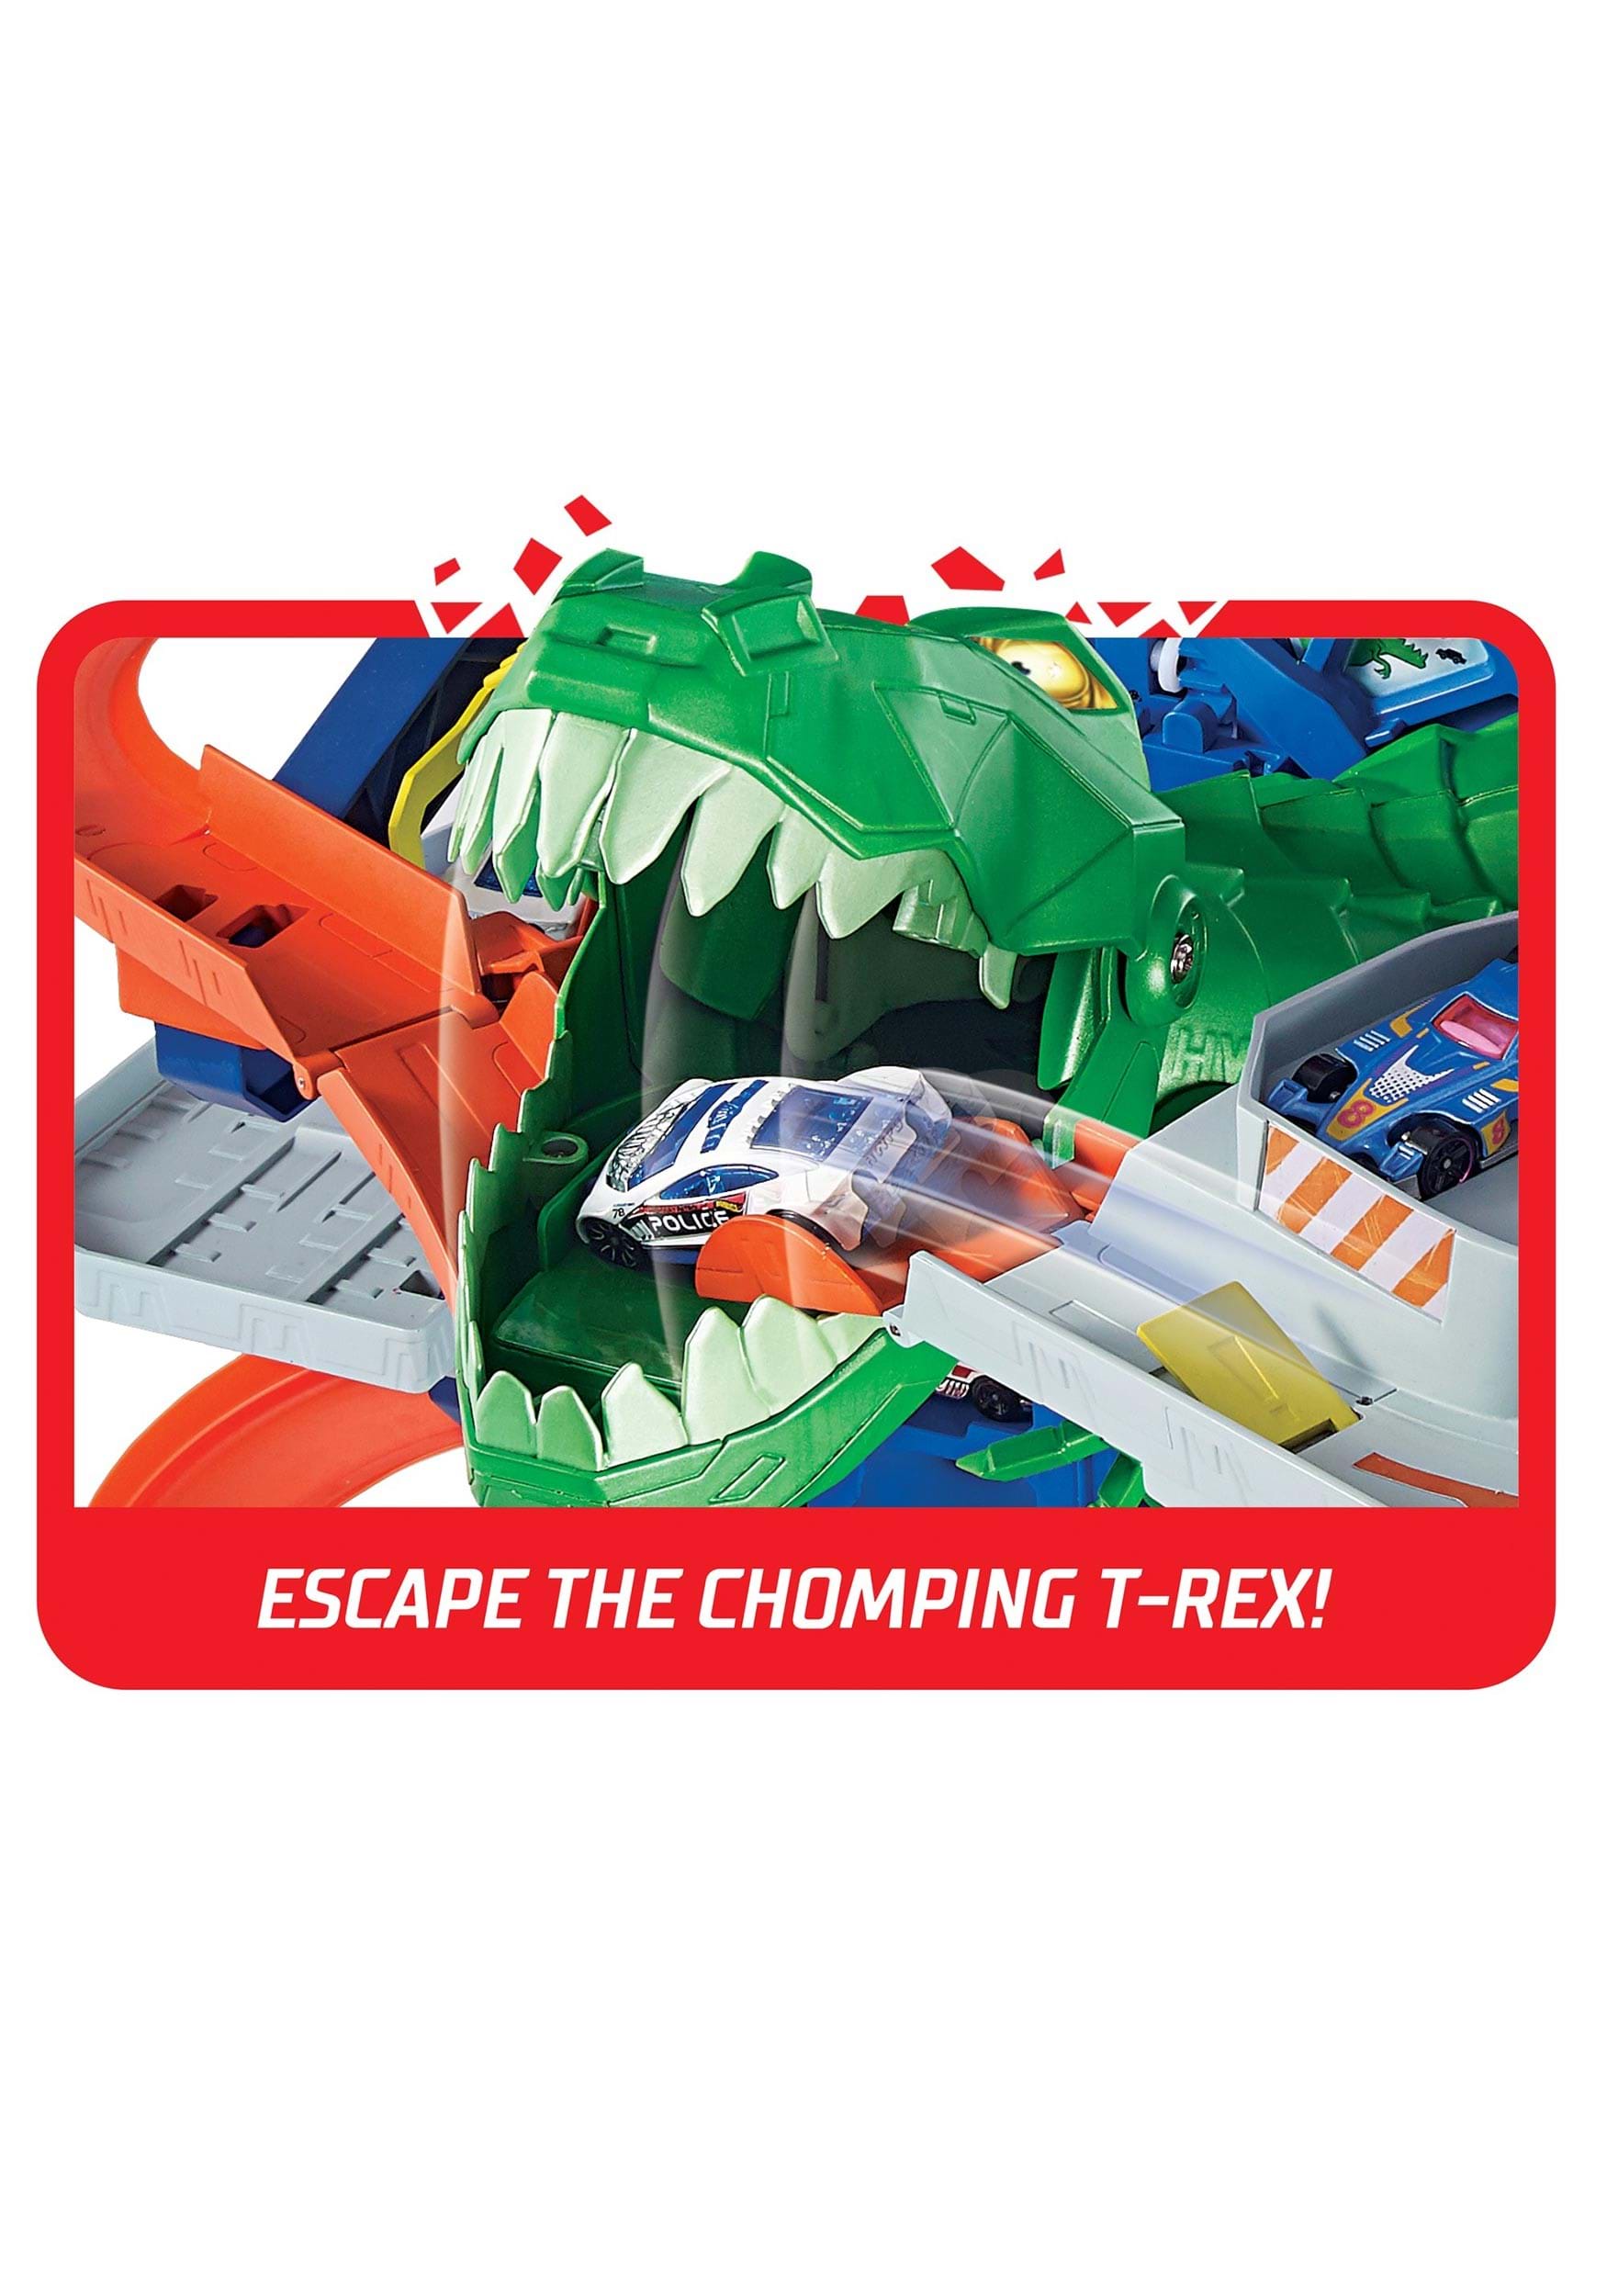 Product Review: Hot Wheels City Robo T-Rex Ultimate Garage